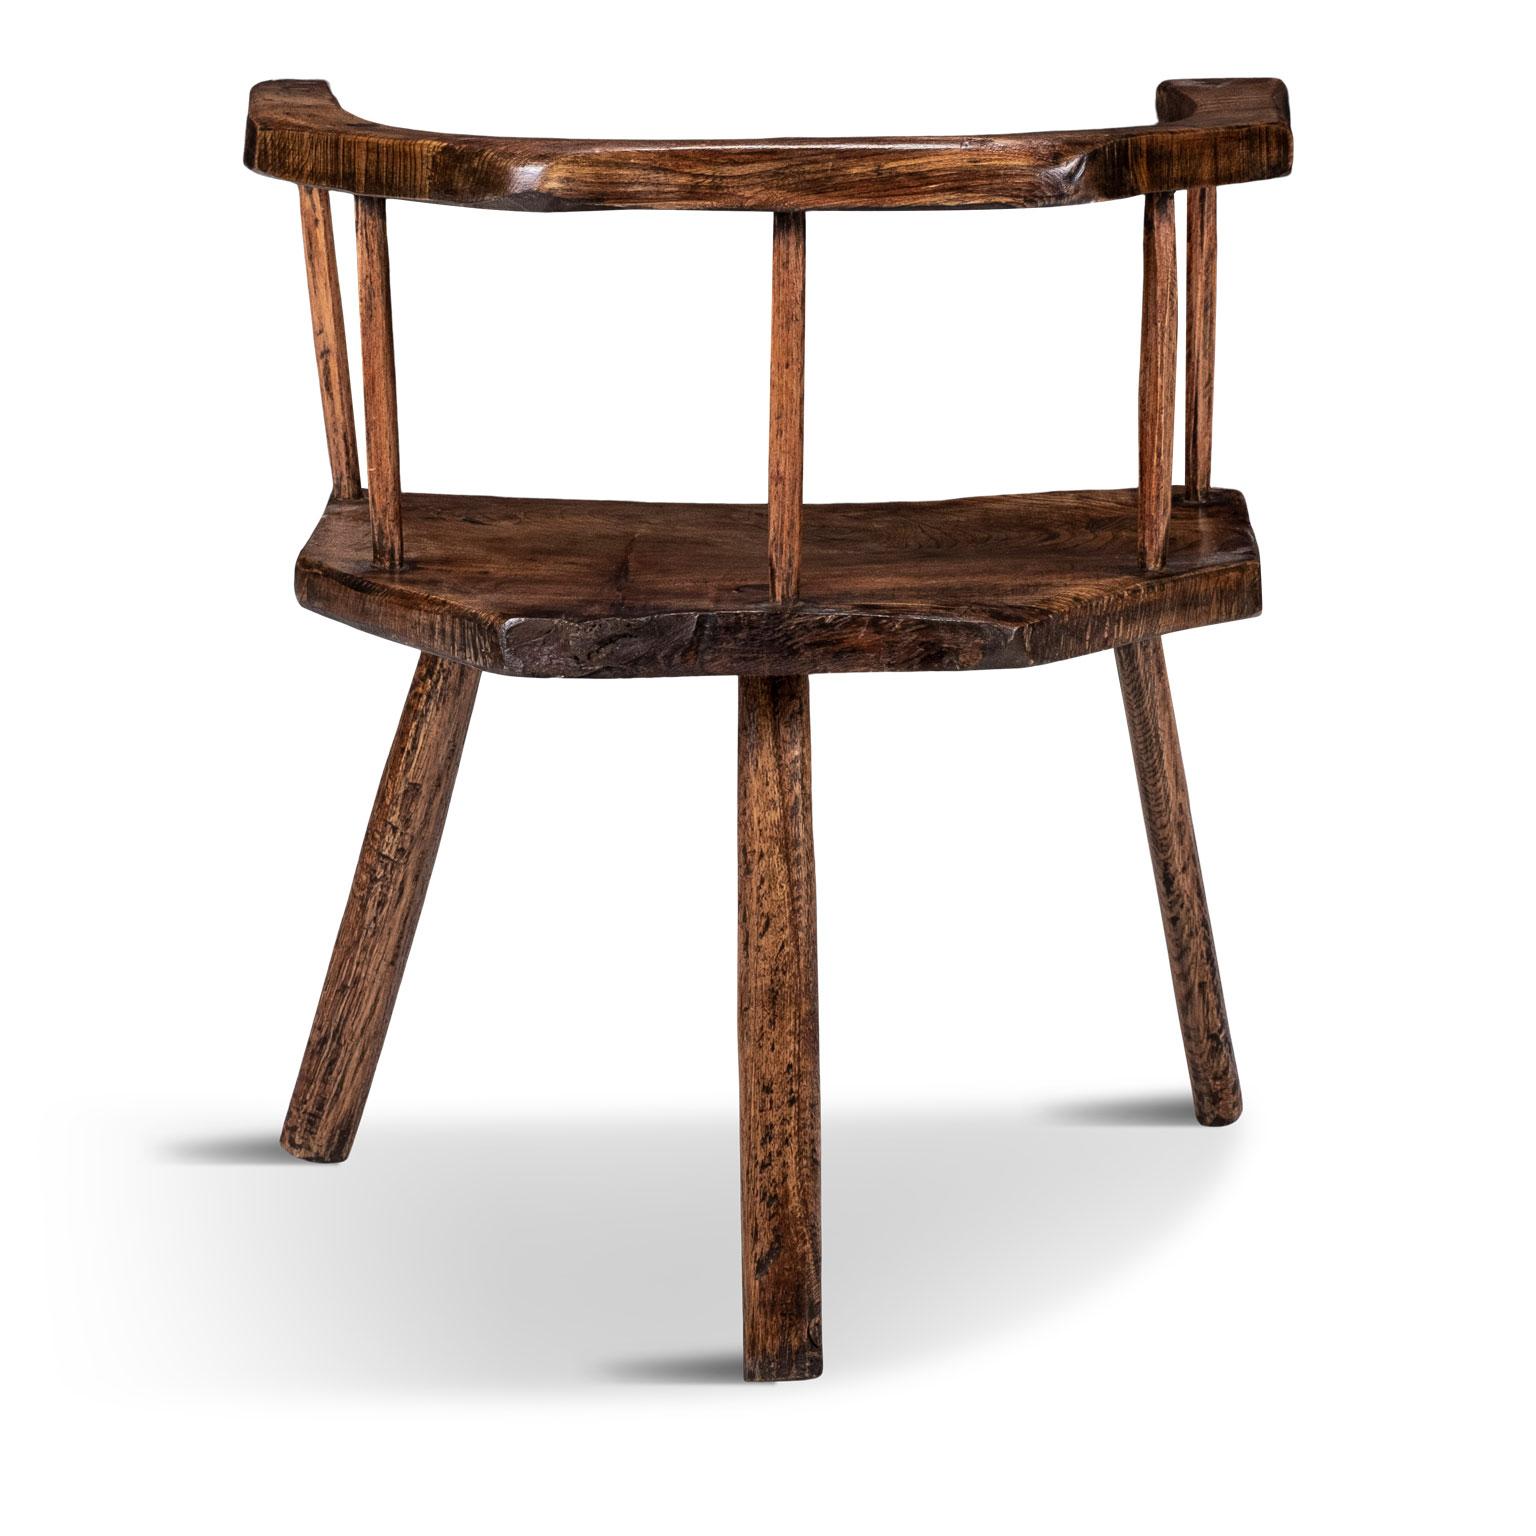 19th Century Primitive British Stick Chair Hand-Carved in Elm and Ash